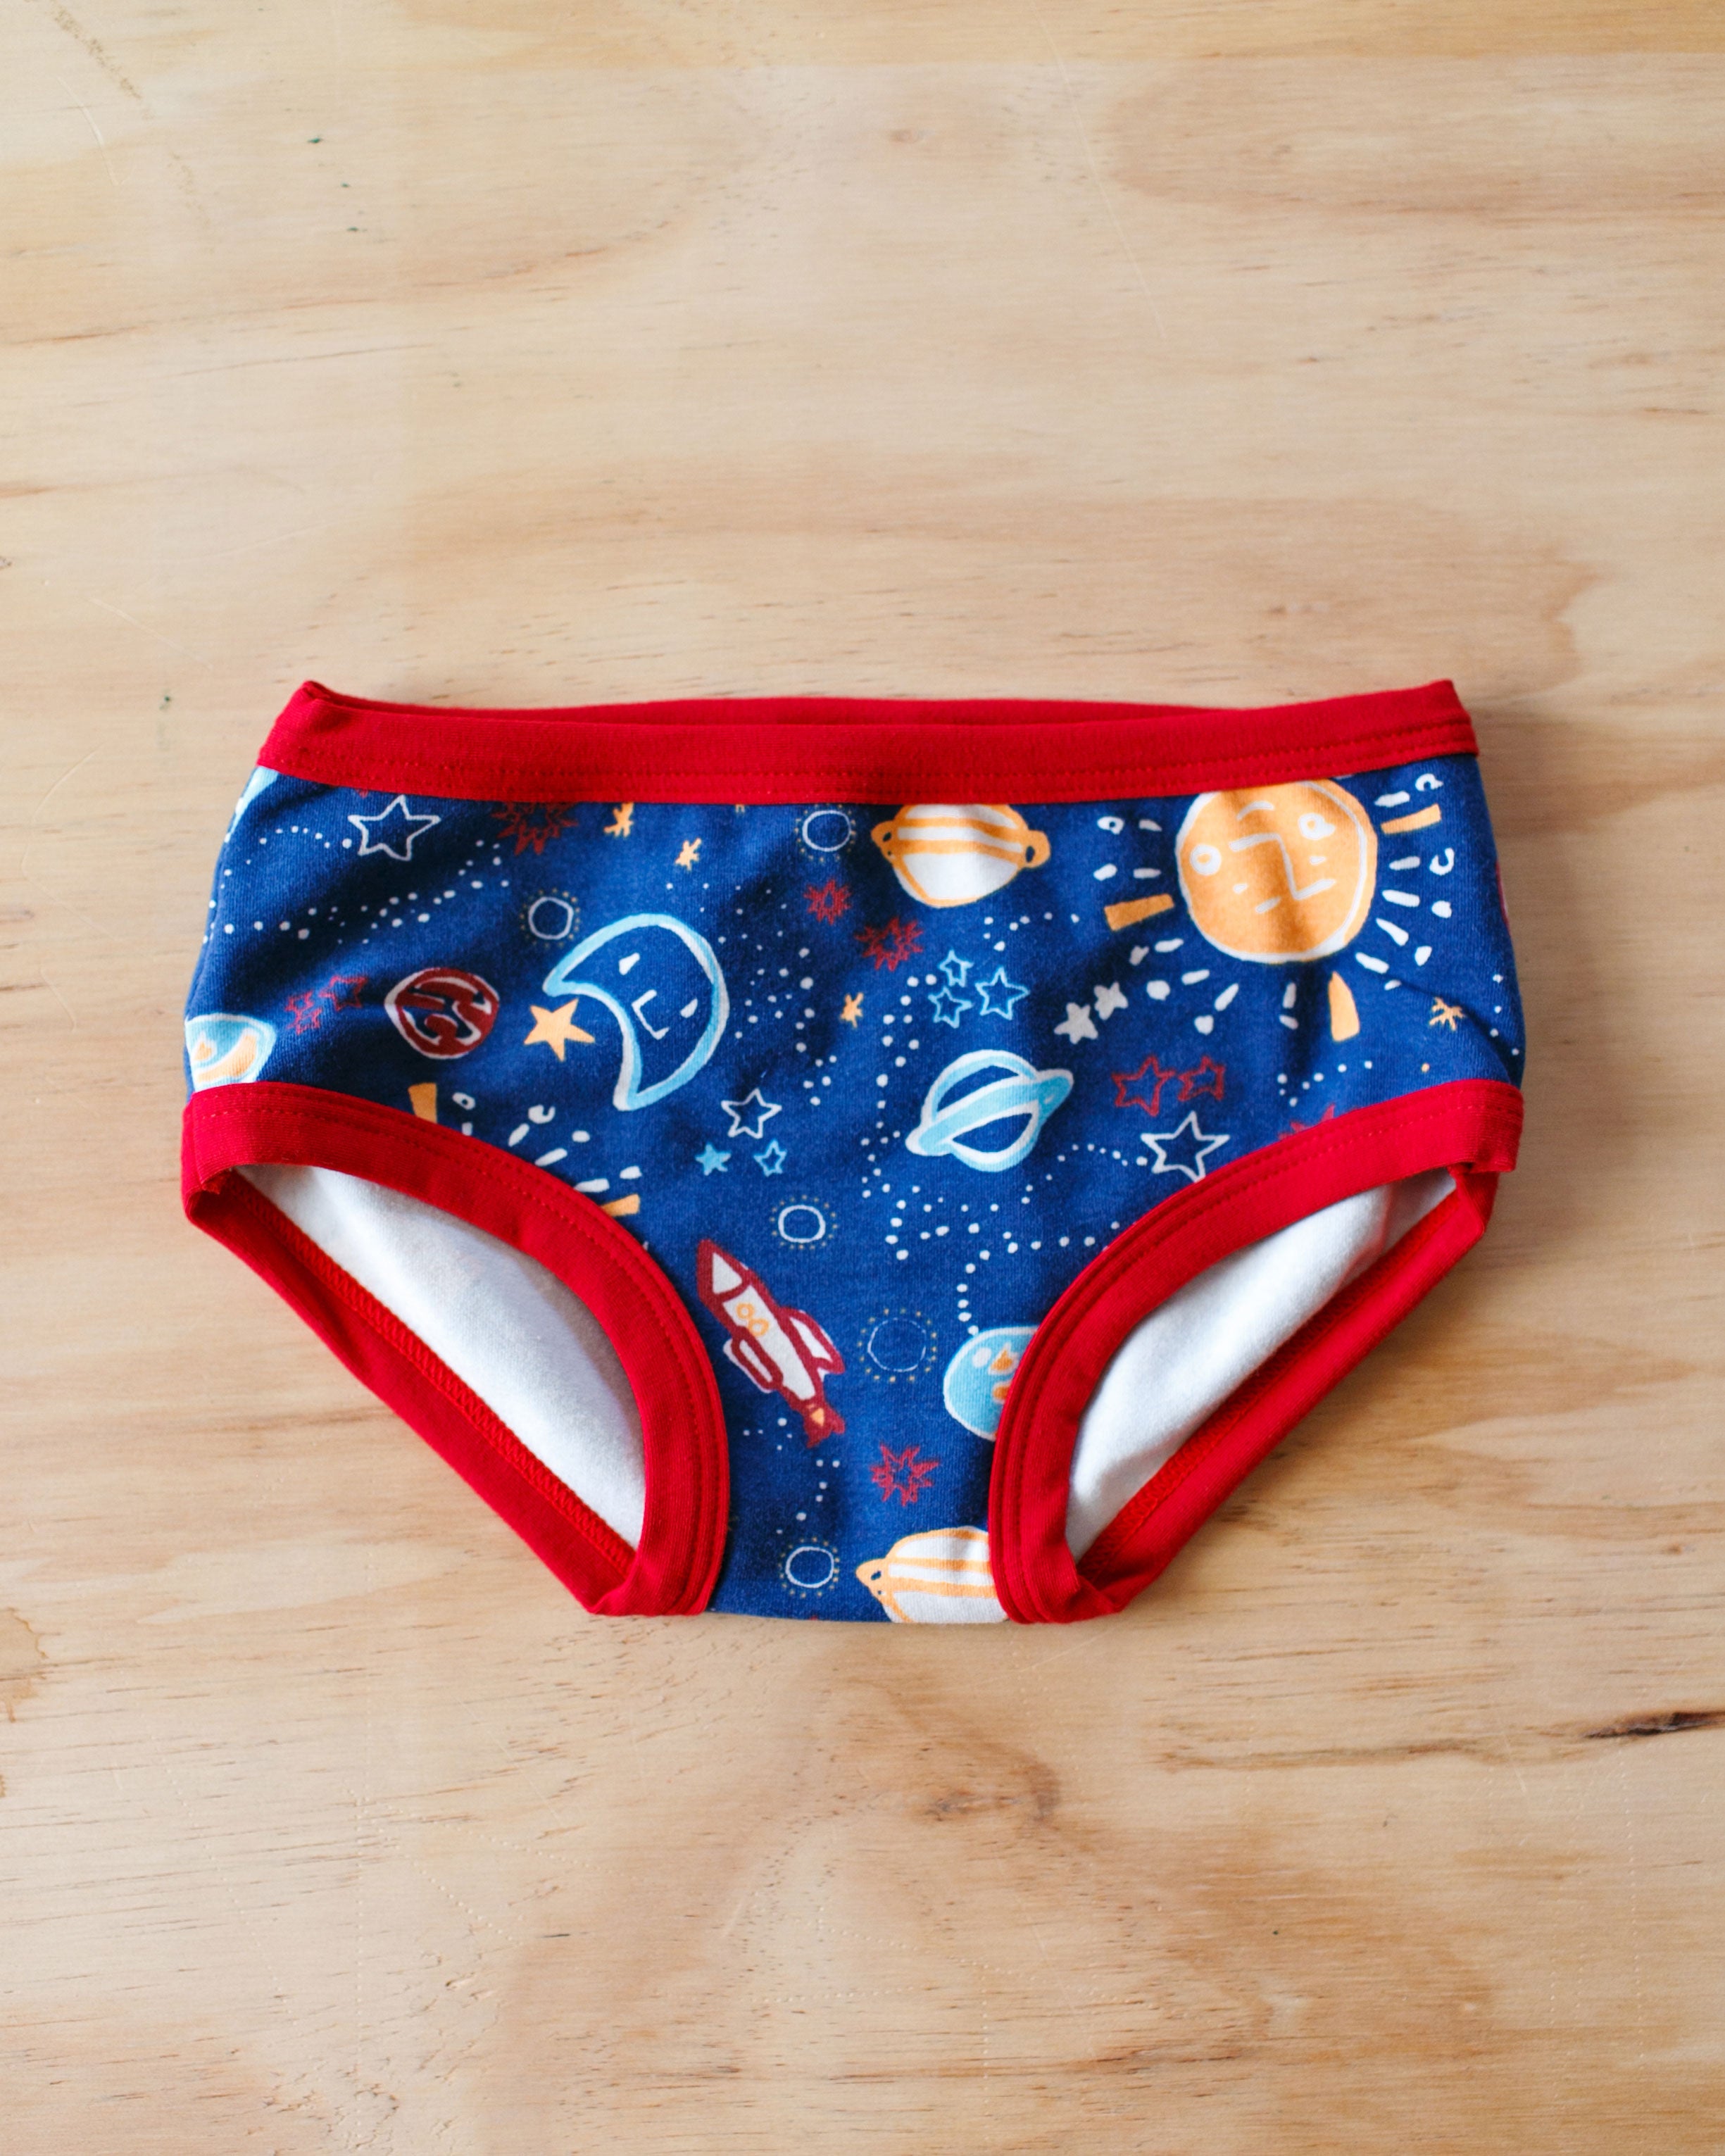 Flat lay of Thunderpants organic cotton Kids underwear in our Dark Sky print: Colorful universe illustrations with red binding.